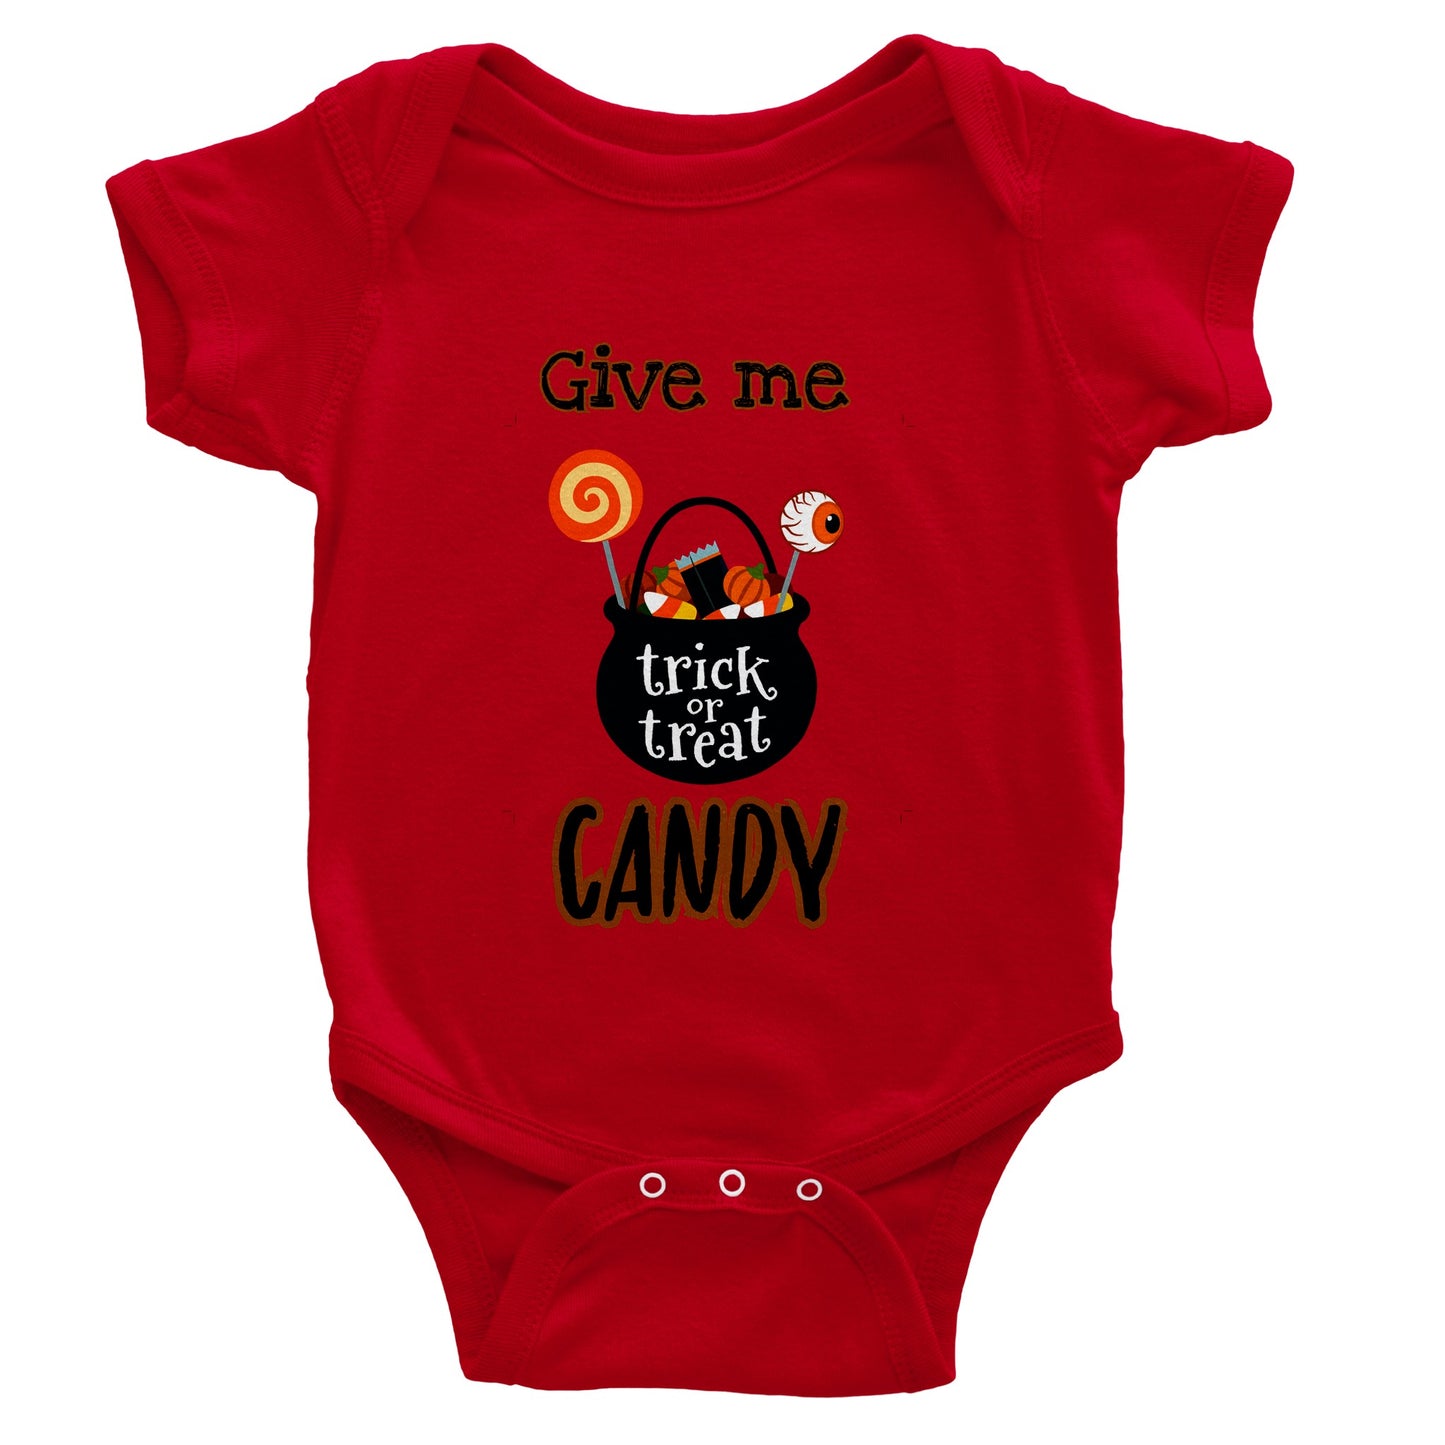 Give me candy -Classic Baby Short Sleeve Bodysuit